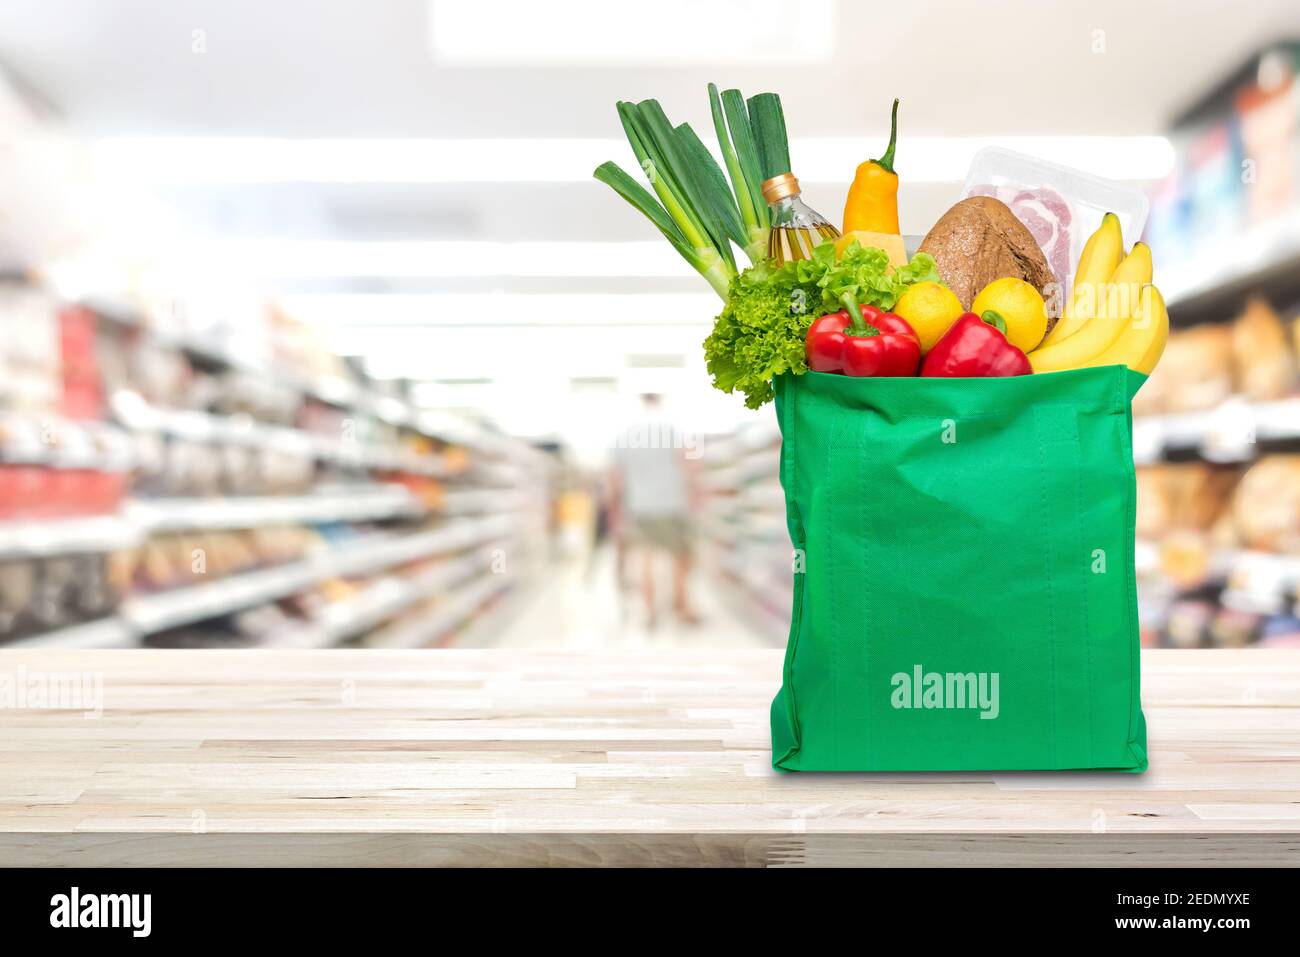 Food and groceries in green eco-friendly reusable shopping bag on wood table with blurred suppermarket aisle in background Stock Photo